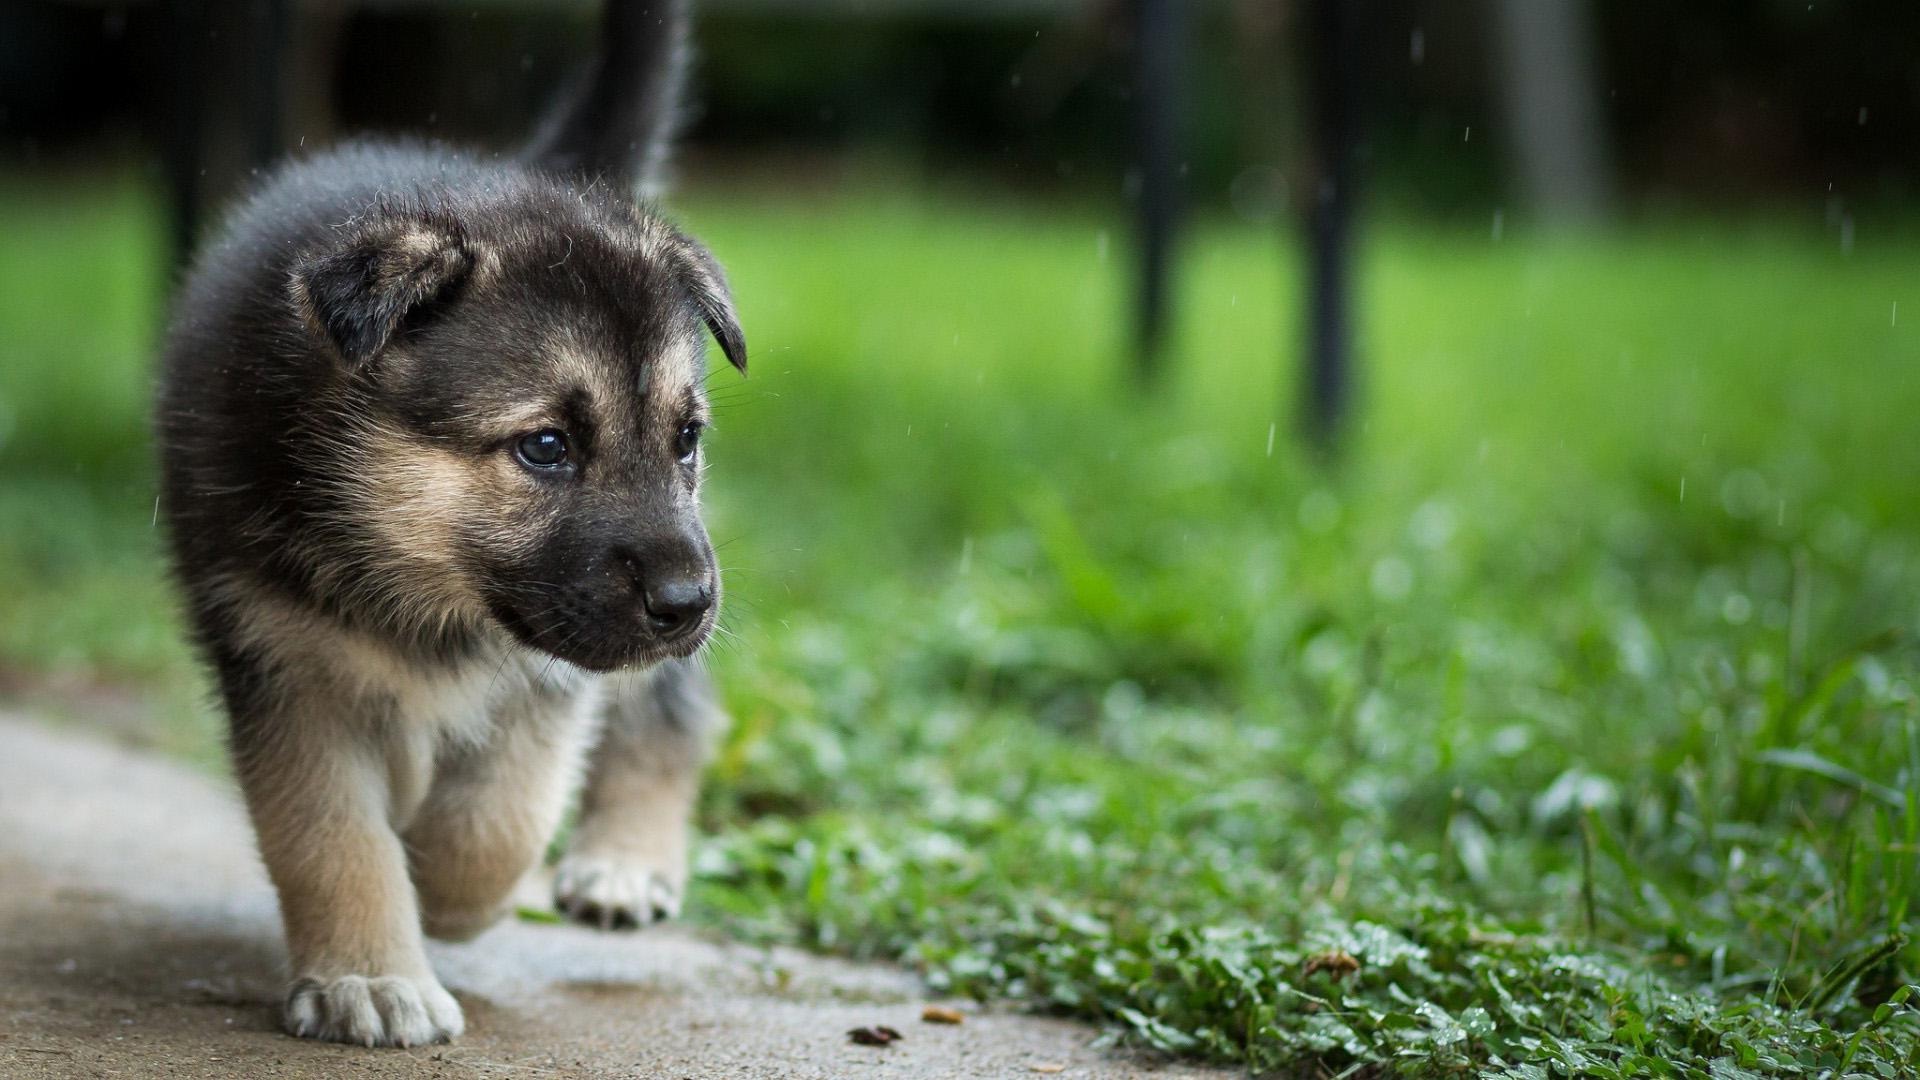 Beautiful puppy (dog) wallpapers | HD Wallpapers Rocks